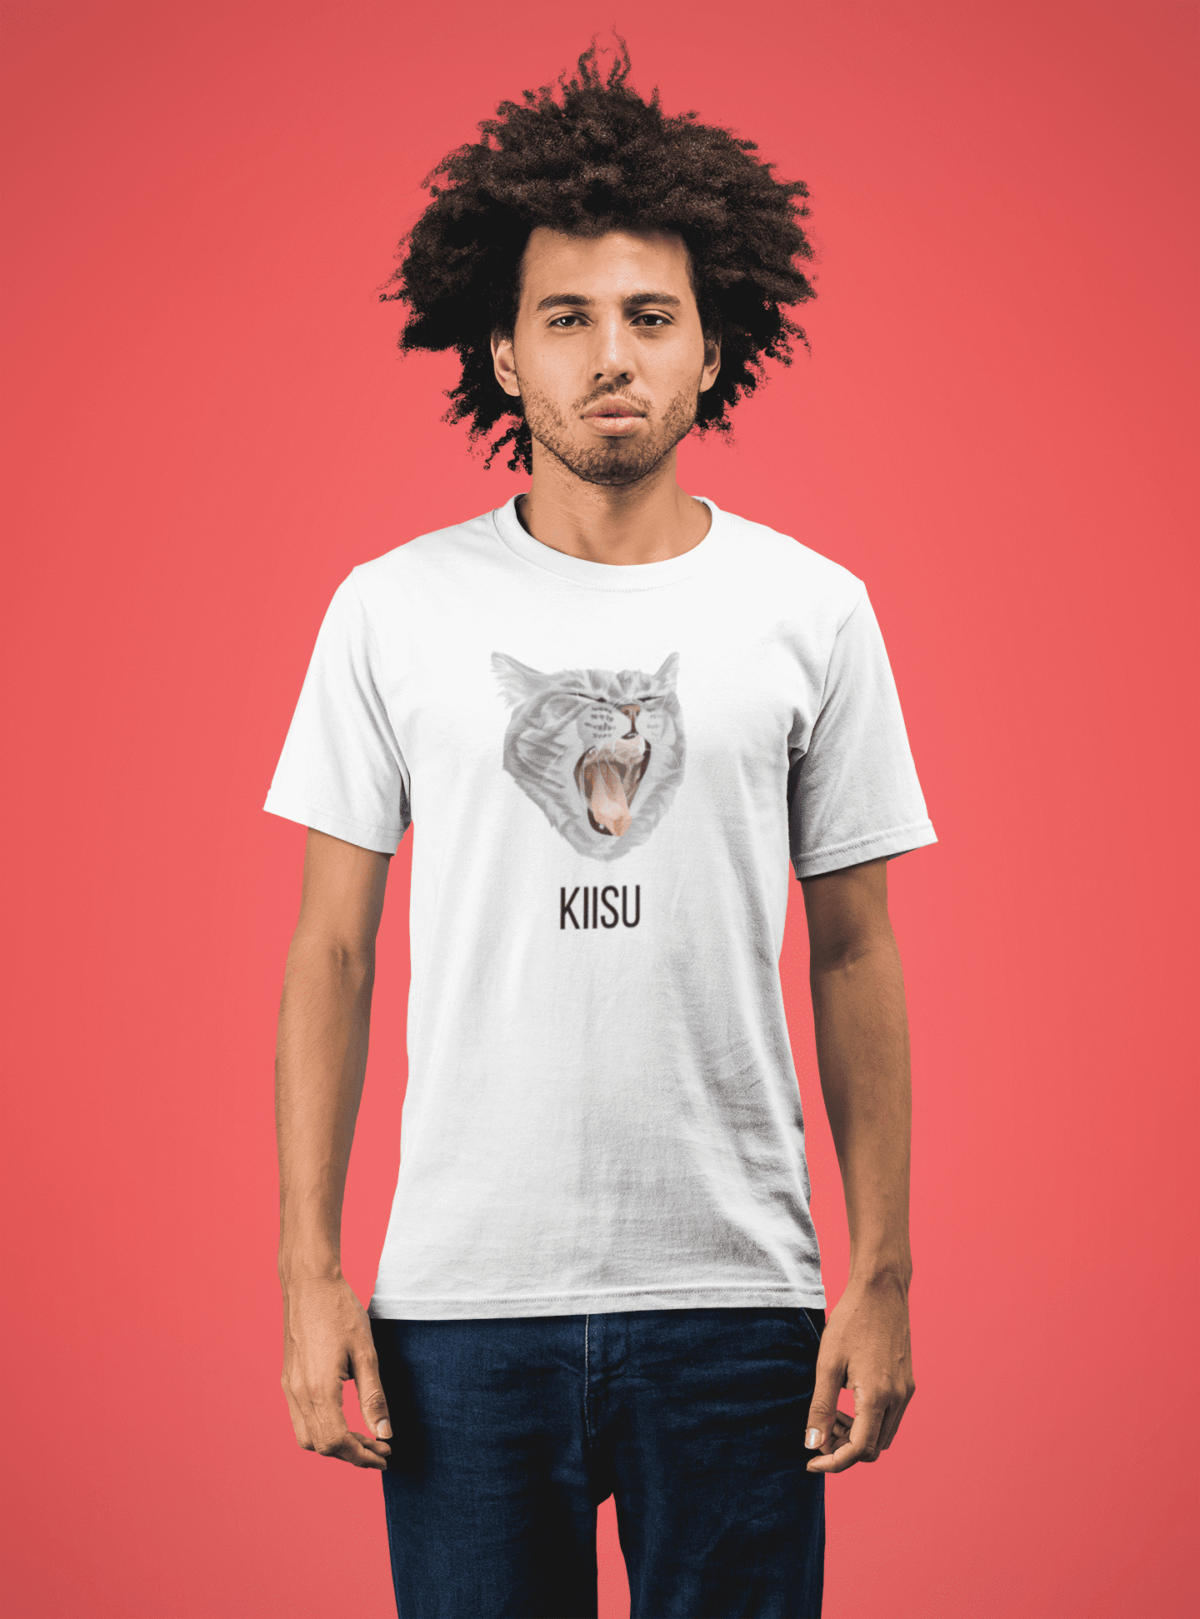 t shirt mockup of a young man with afro hair 22221